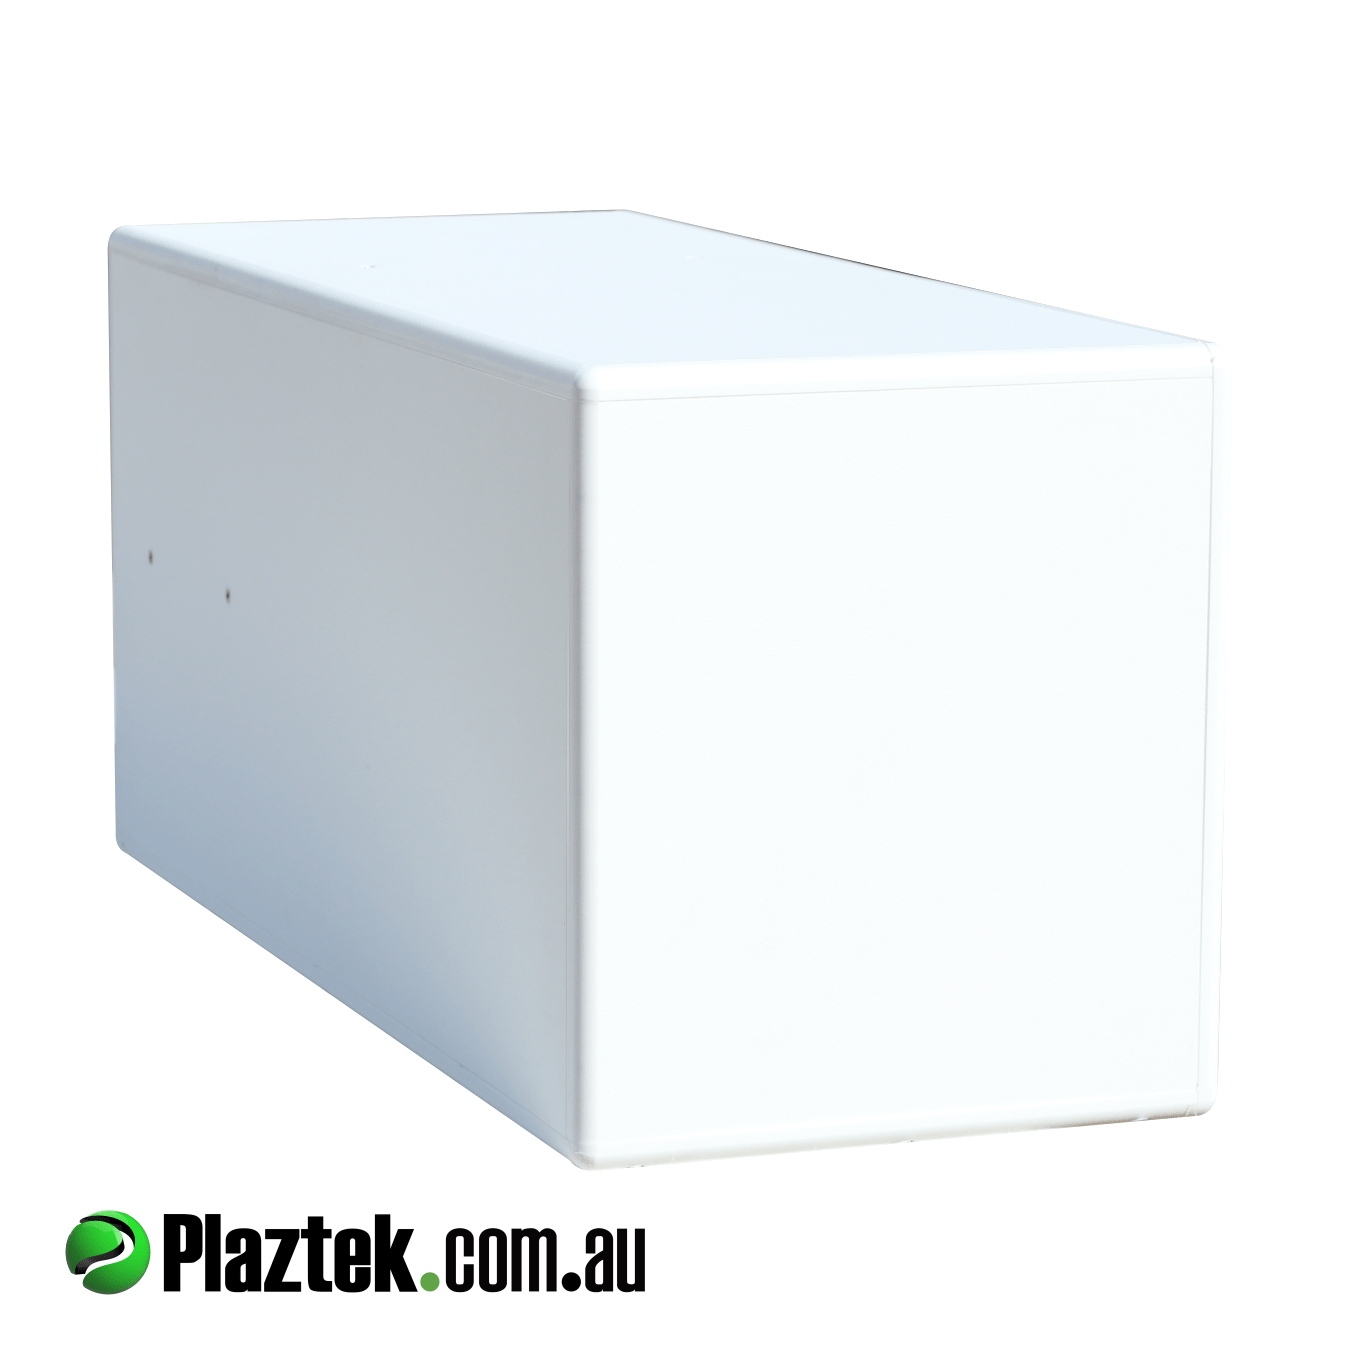 Plaztek Fishing Tackle Cabinet rear view, a fully sealed weatherproof storage box, perfect for tackle storage under your bait board